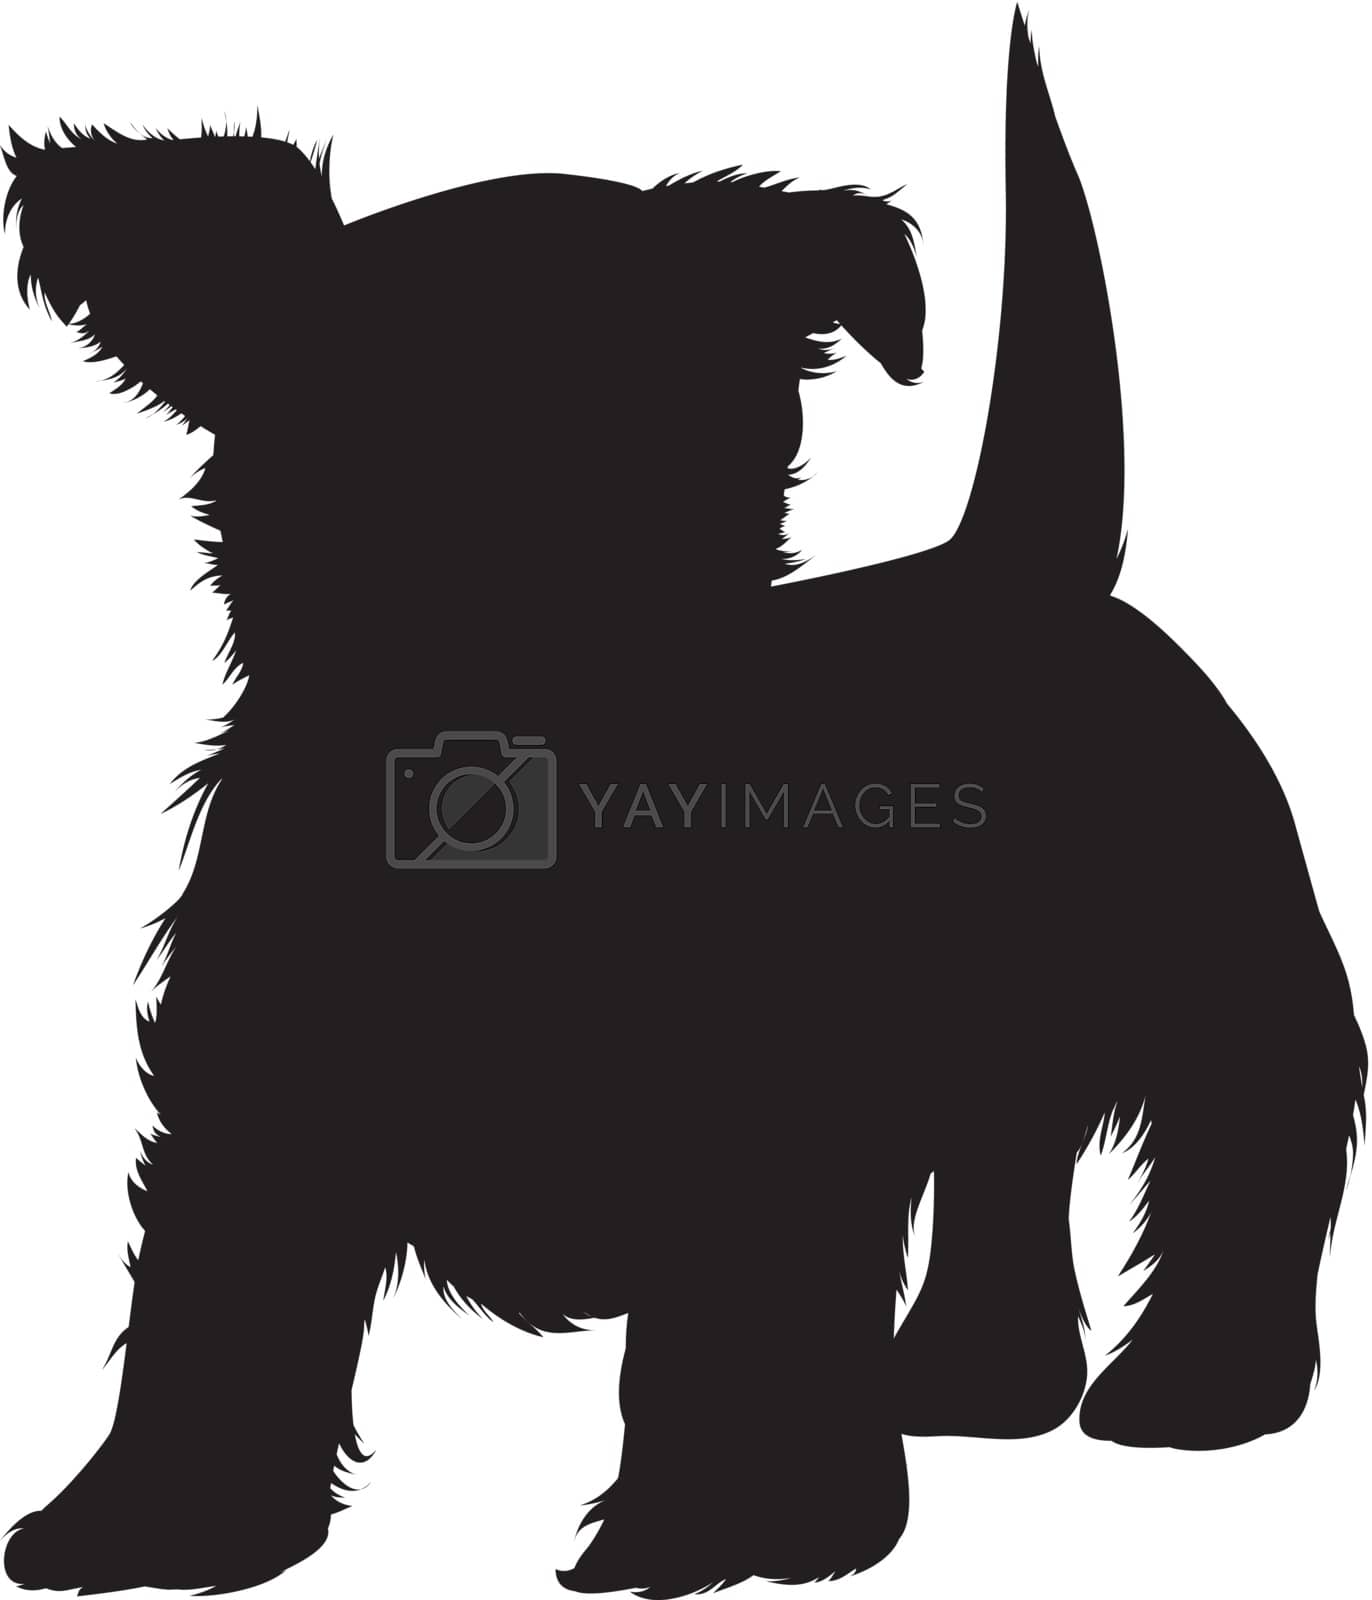 Royalty free image of Dog silhouette by yurka